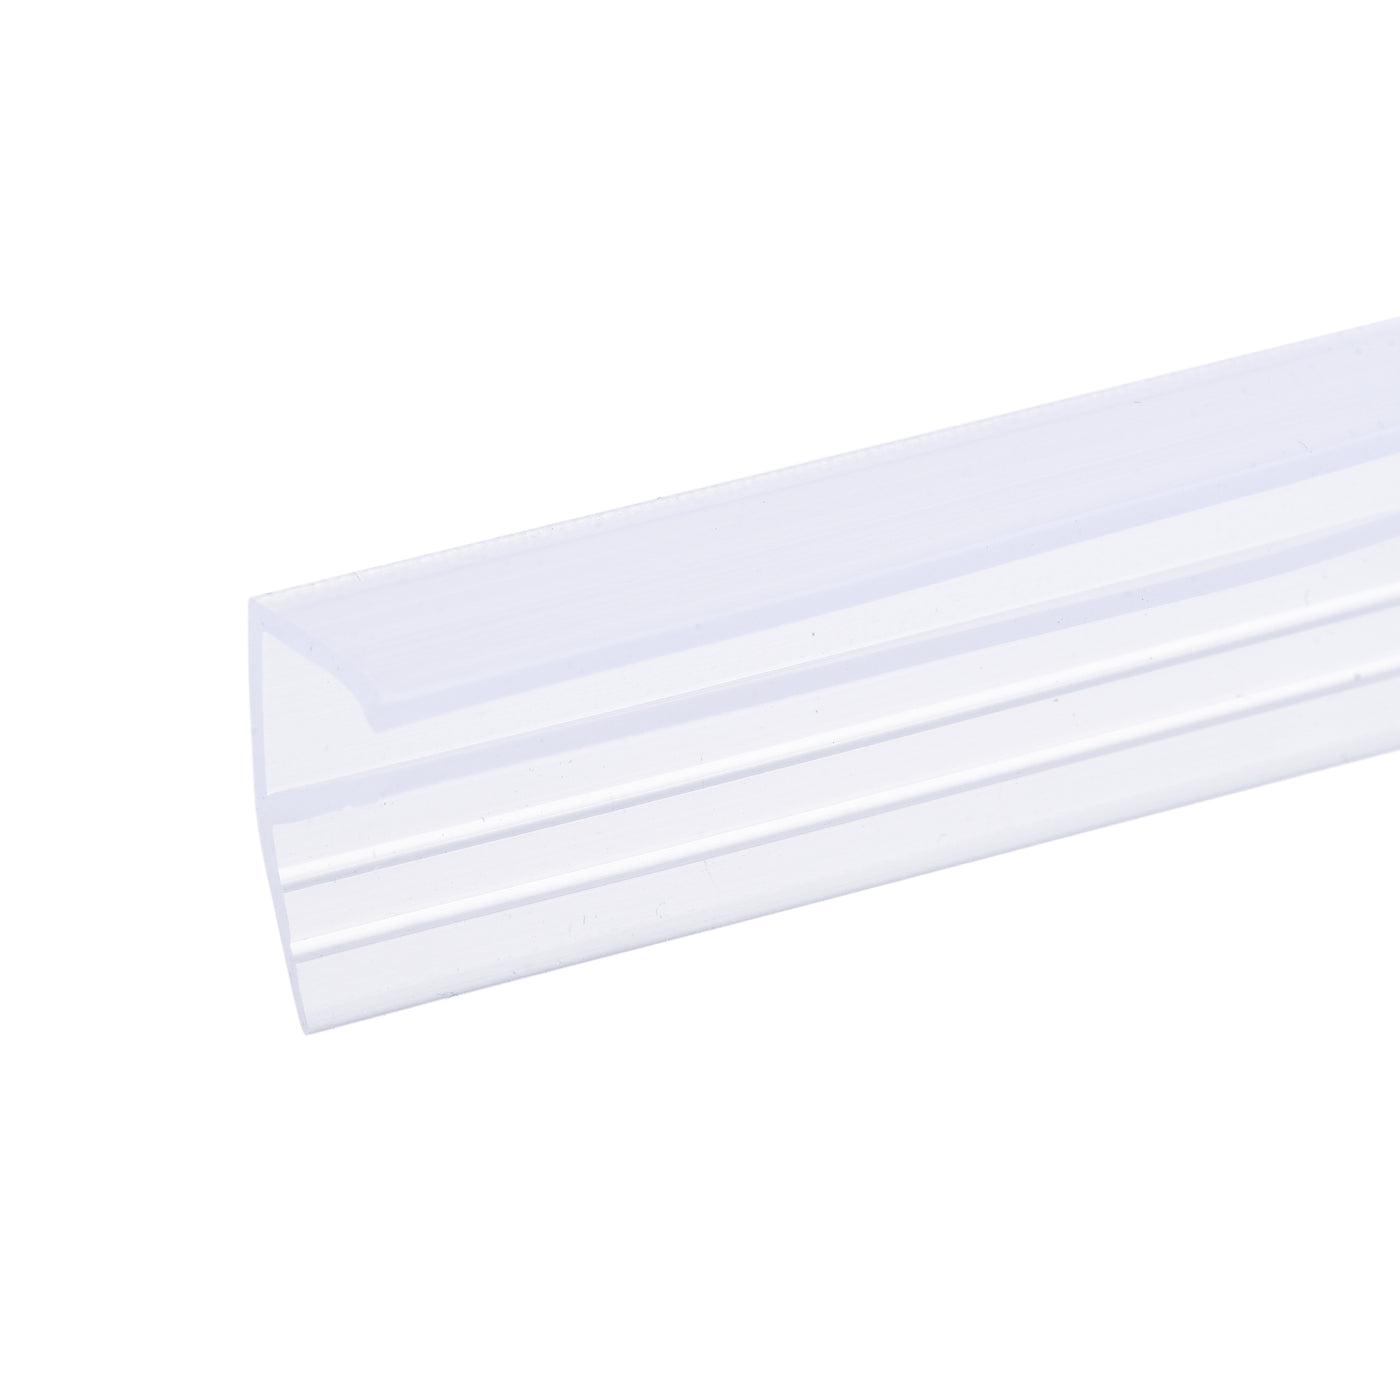 Uxcell Uxcell Frameless Glass Shower Door Sweep 177.17" for 5/16"(8mm) Glass F-Type Seal Strip